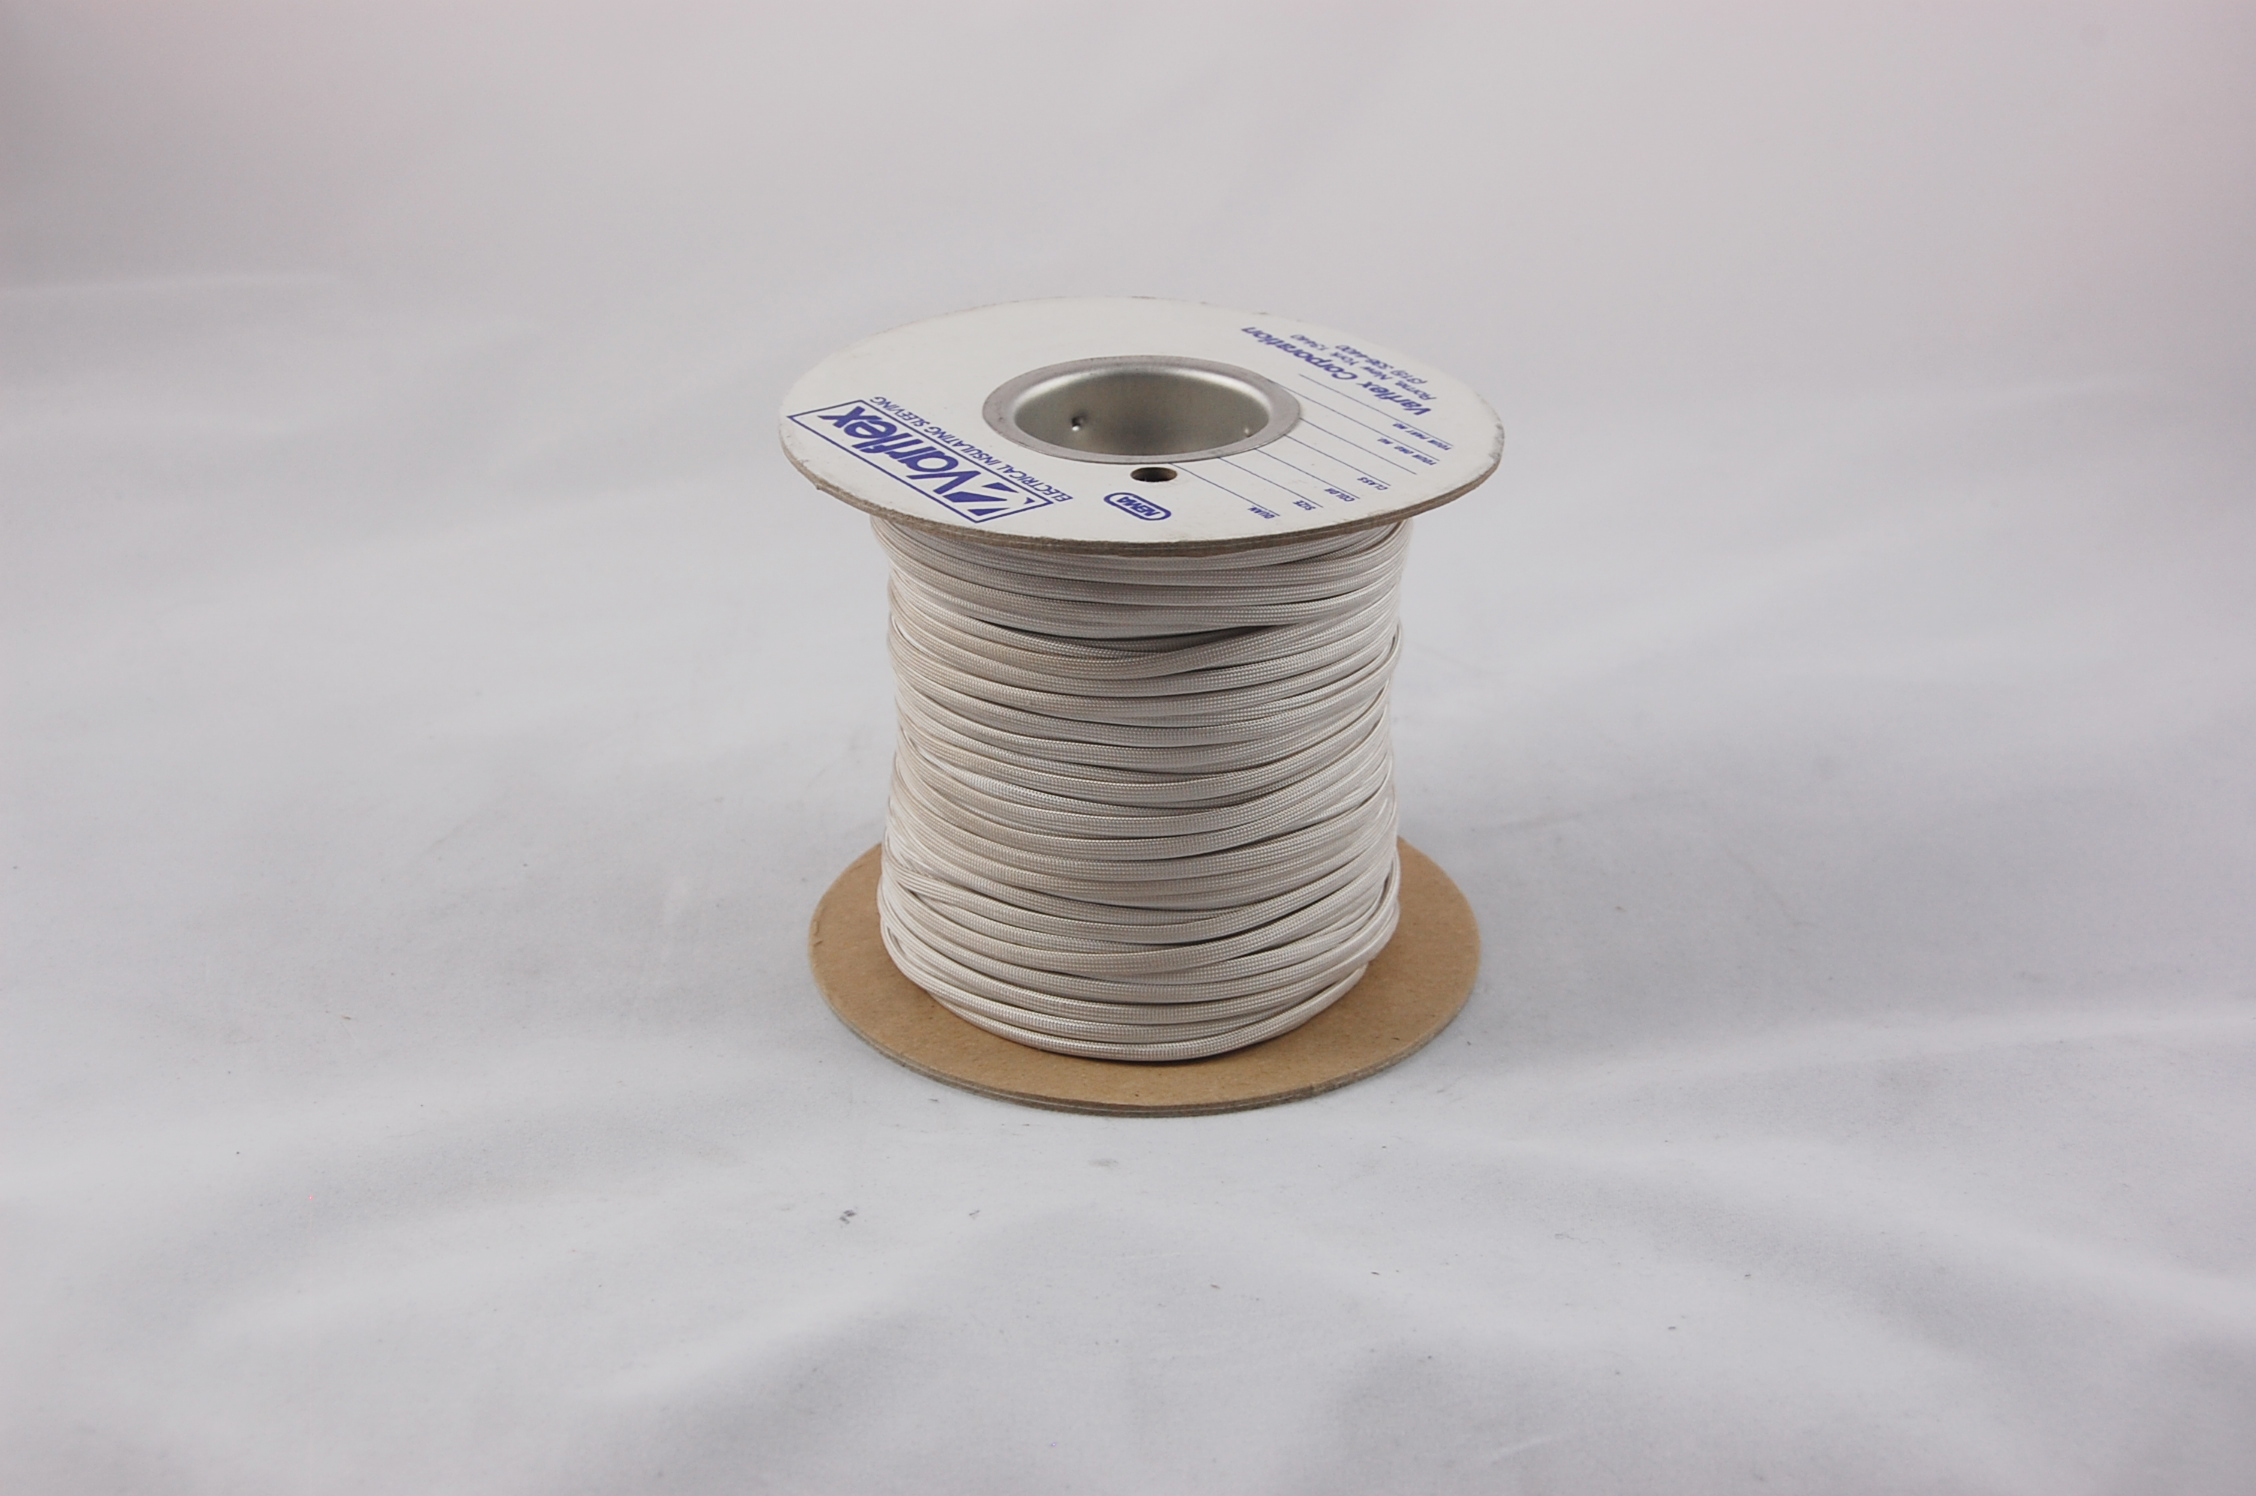 #20 AWG Varglas Type H Heat-Cleaned High Temperature Non-Fray Flexible Fiberglass Sleeving , natural, 500 FT per spool